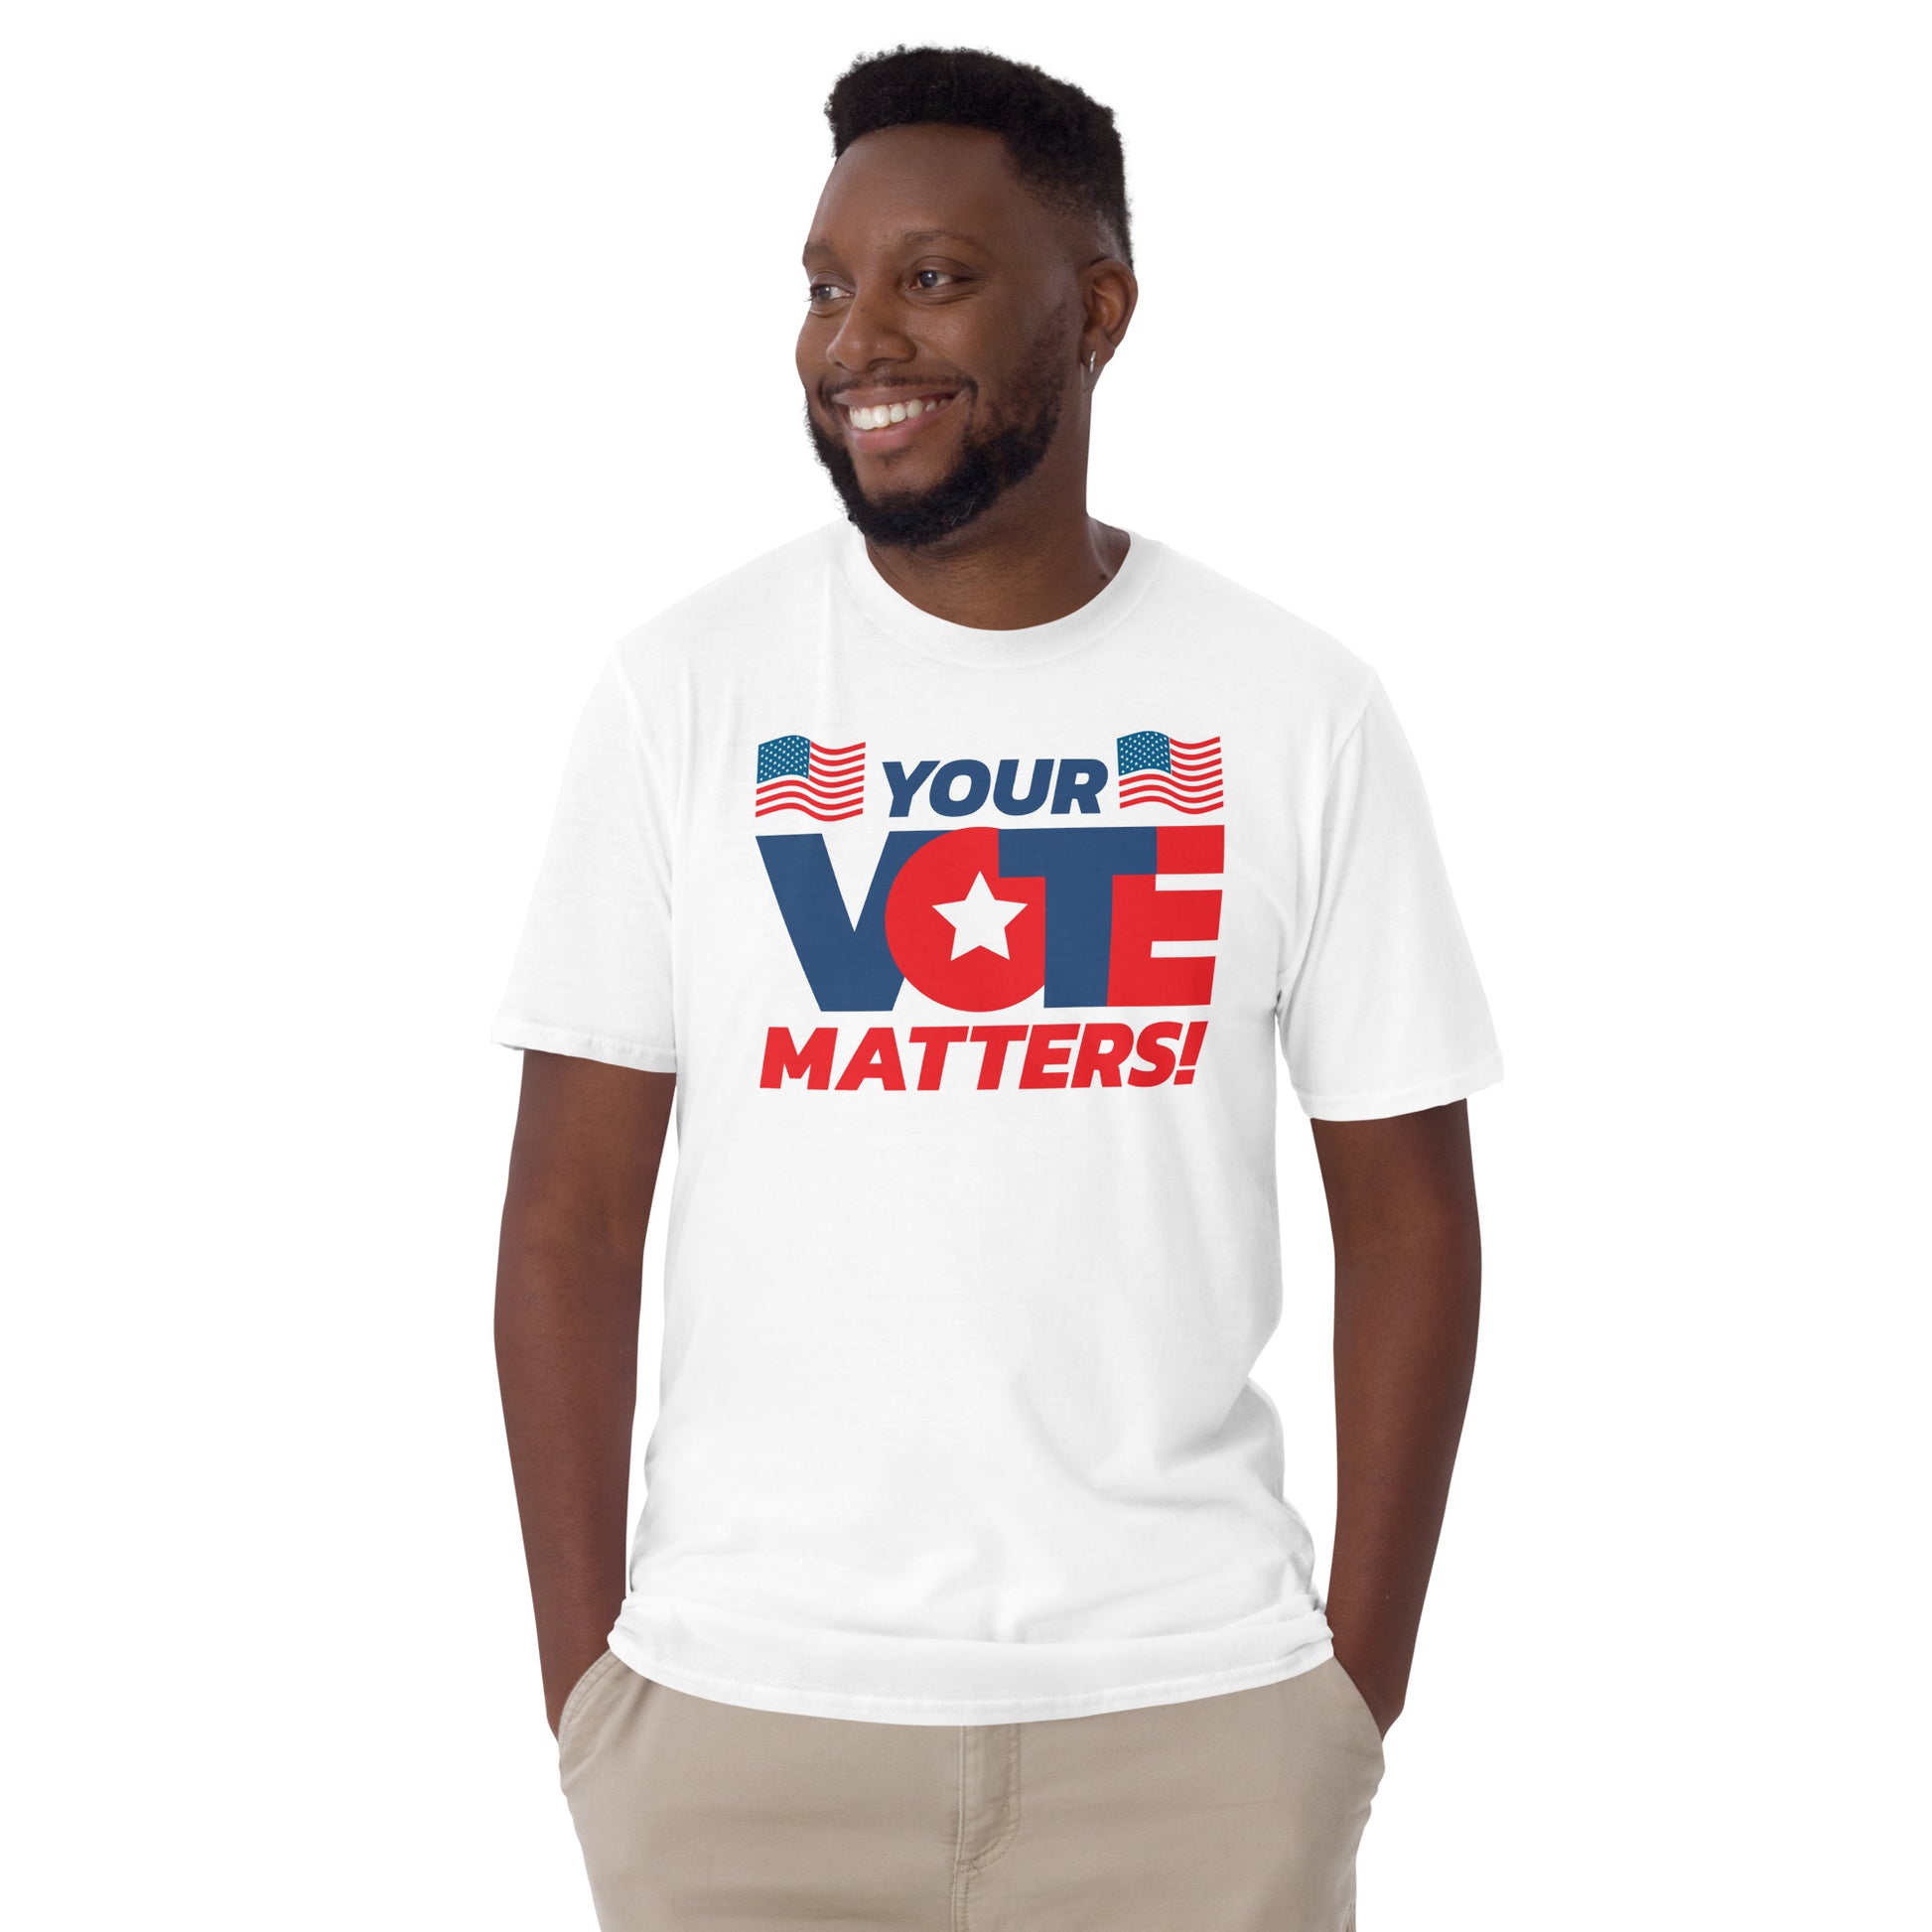 Show Your Patriotism with our Election T-shirt